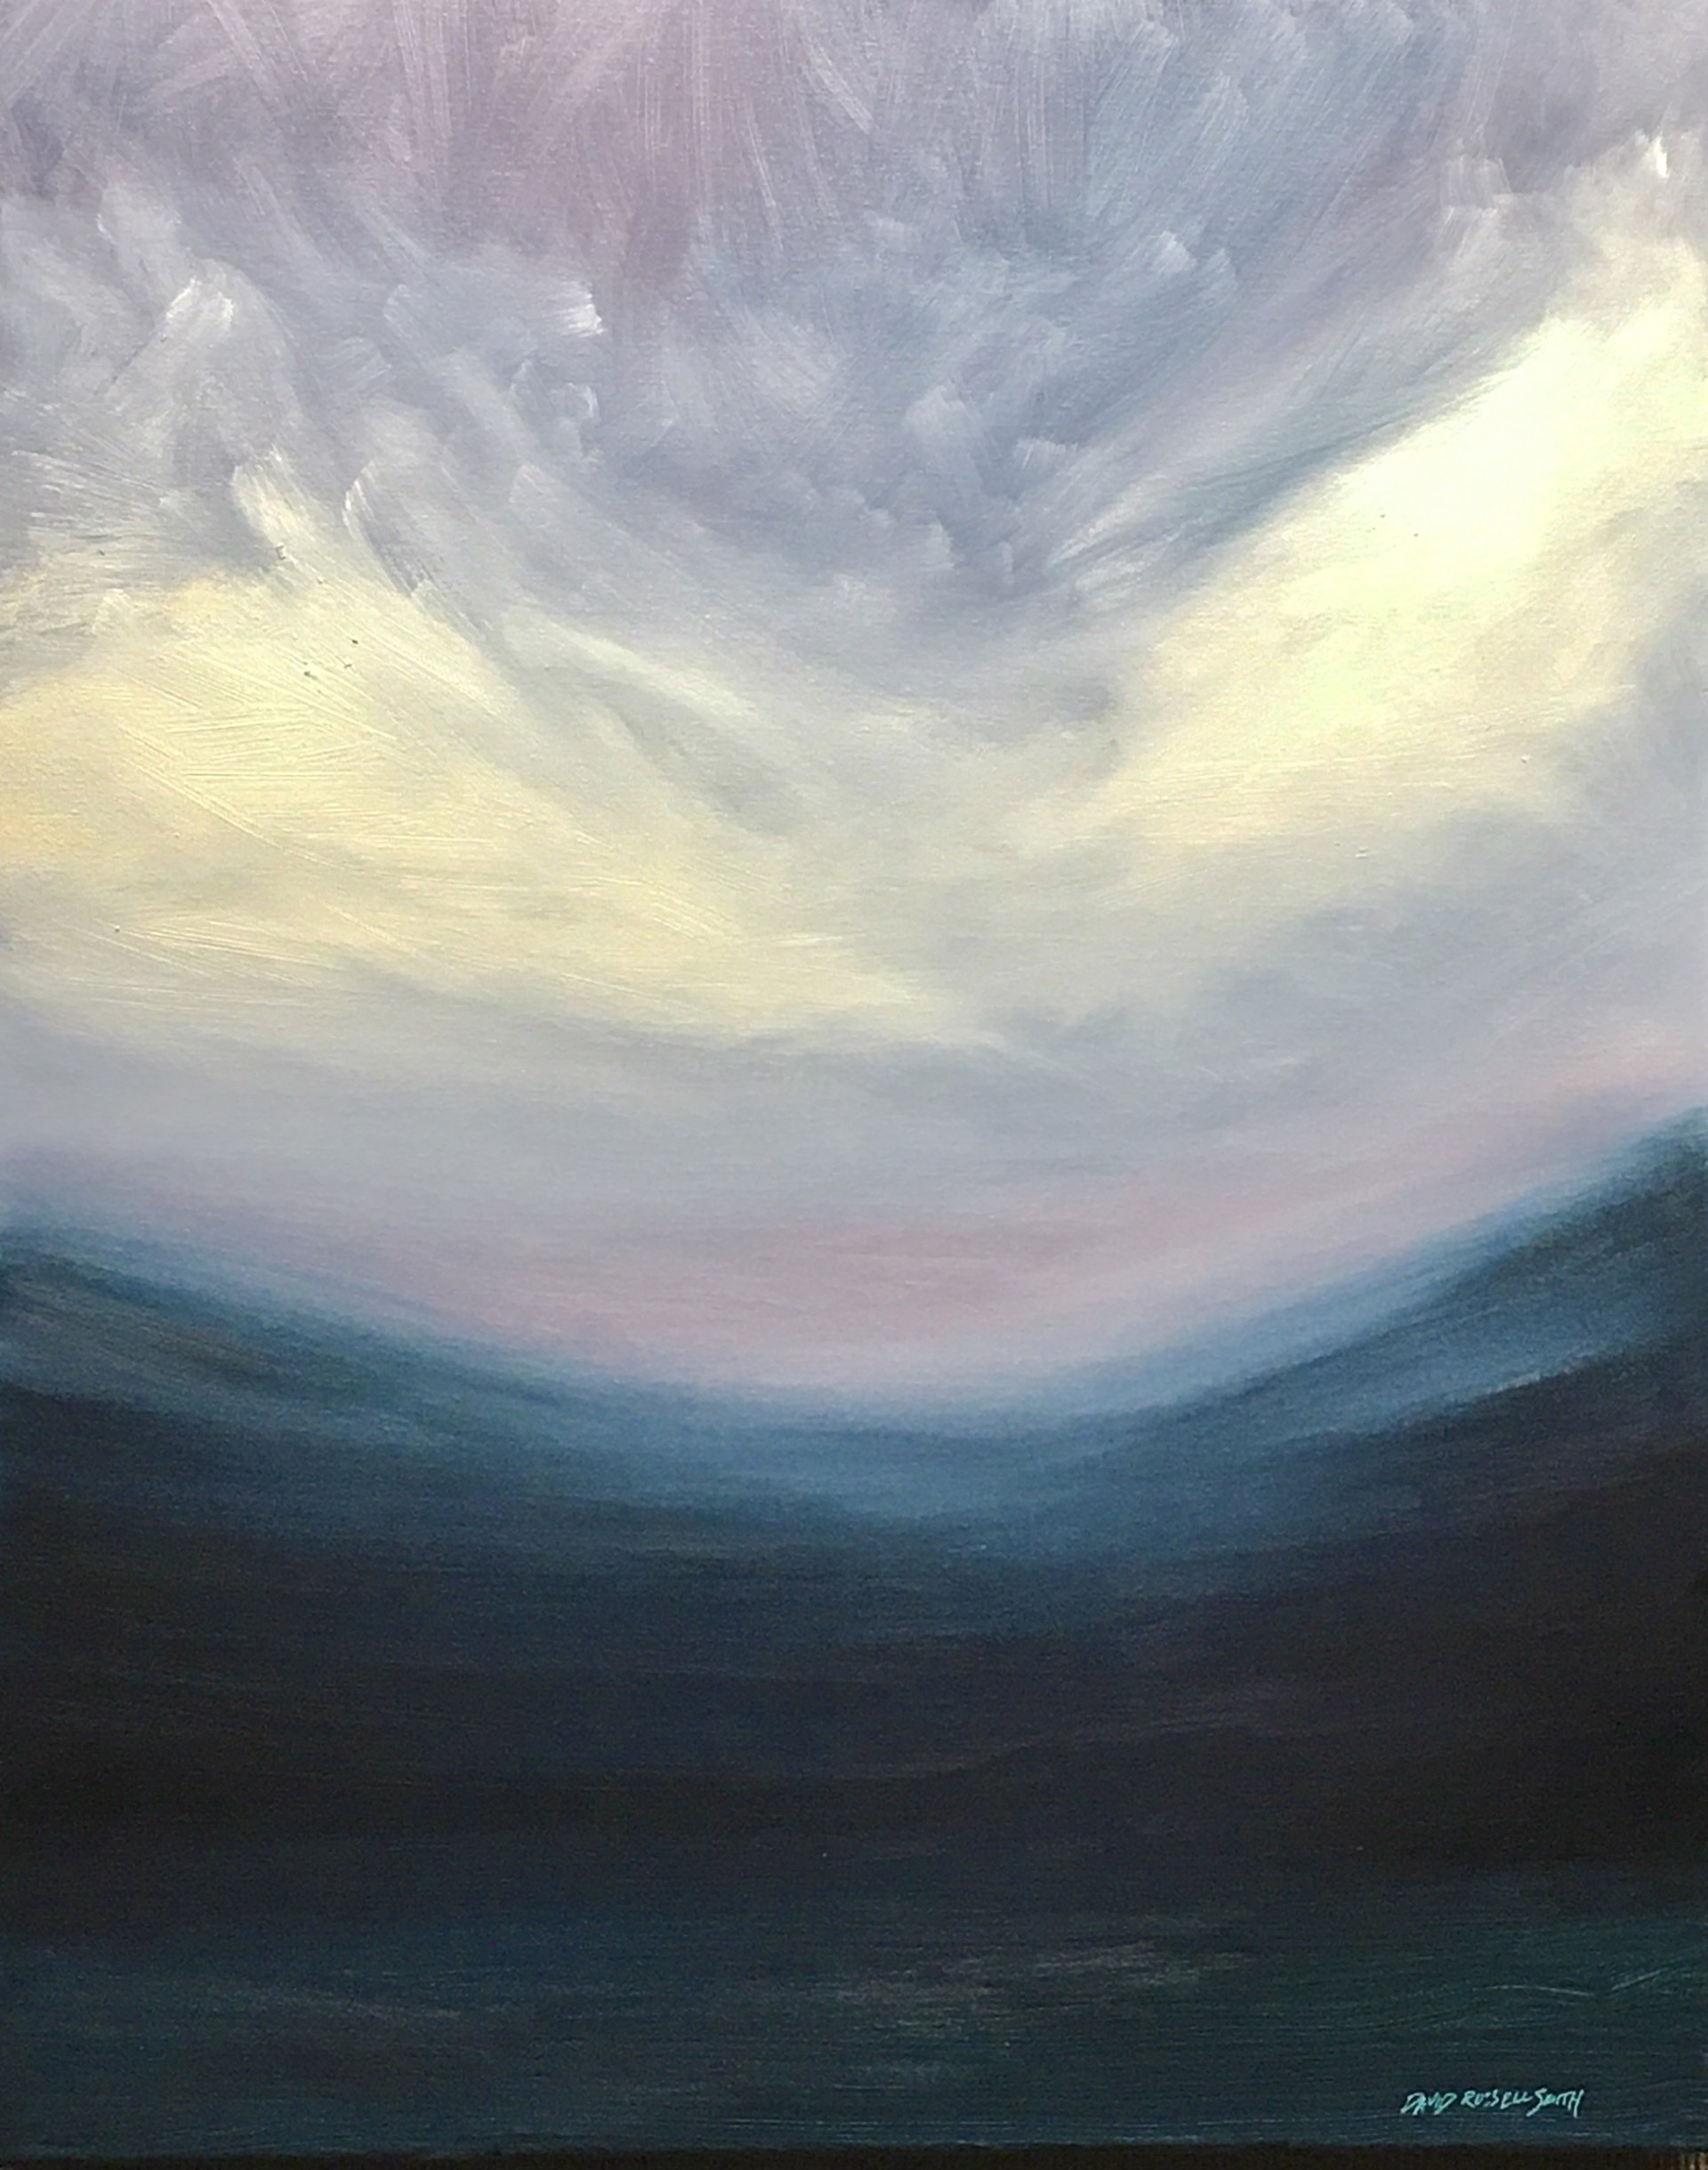 Surreal Skies, No.12 by David Russell Smith